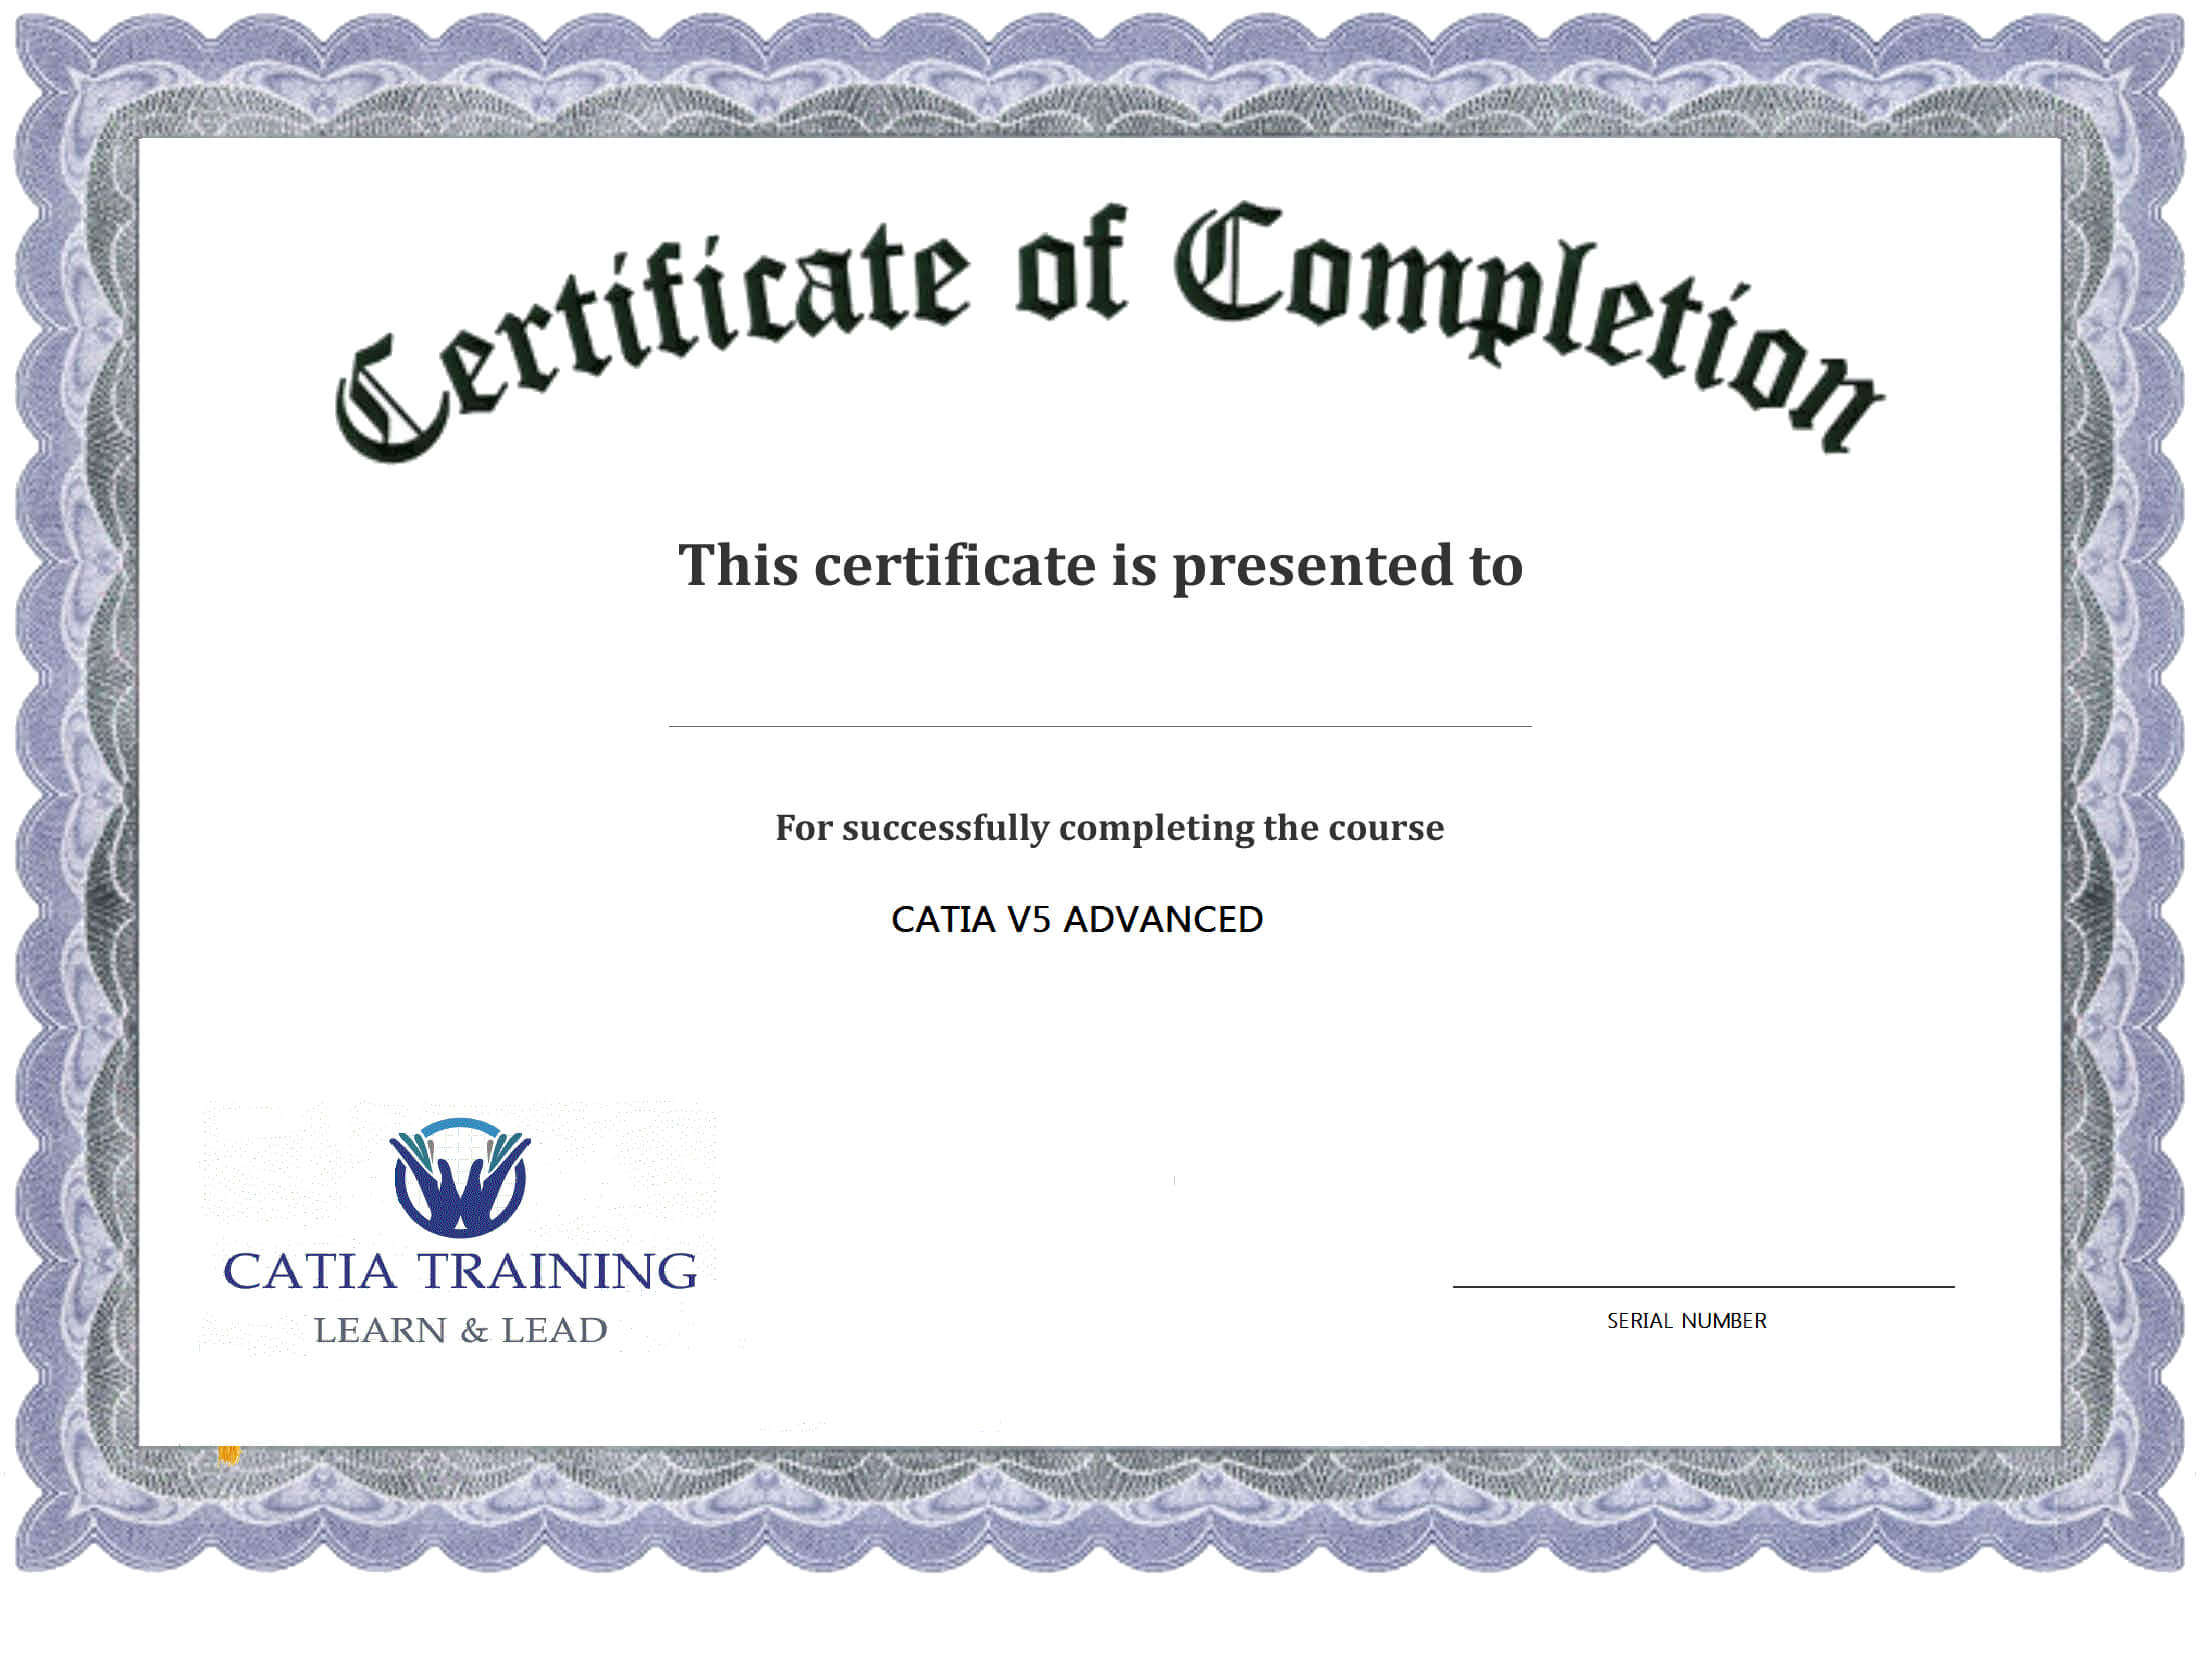 🥰free Printable Certificate Of Participation Templates (Cop)🥰 Intended For Free Templates For Certificates Of Participation